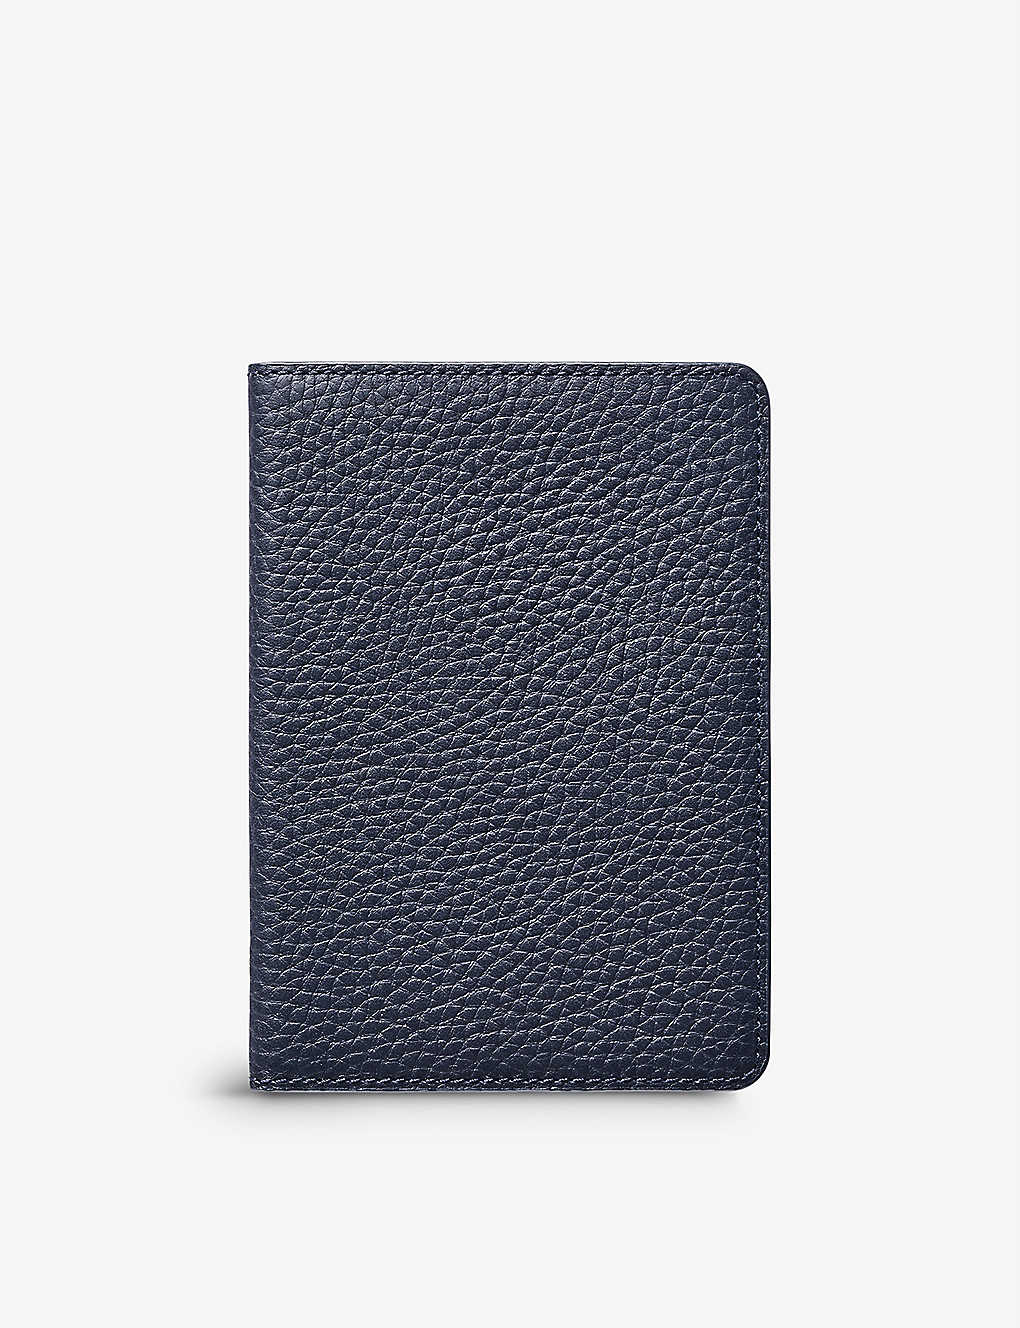 Aspinal Of London Navy Slot-detail Grained Leather Passport Cover